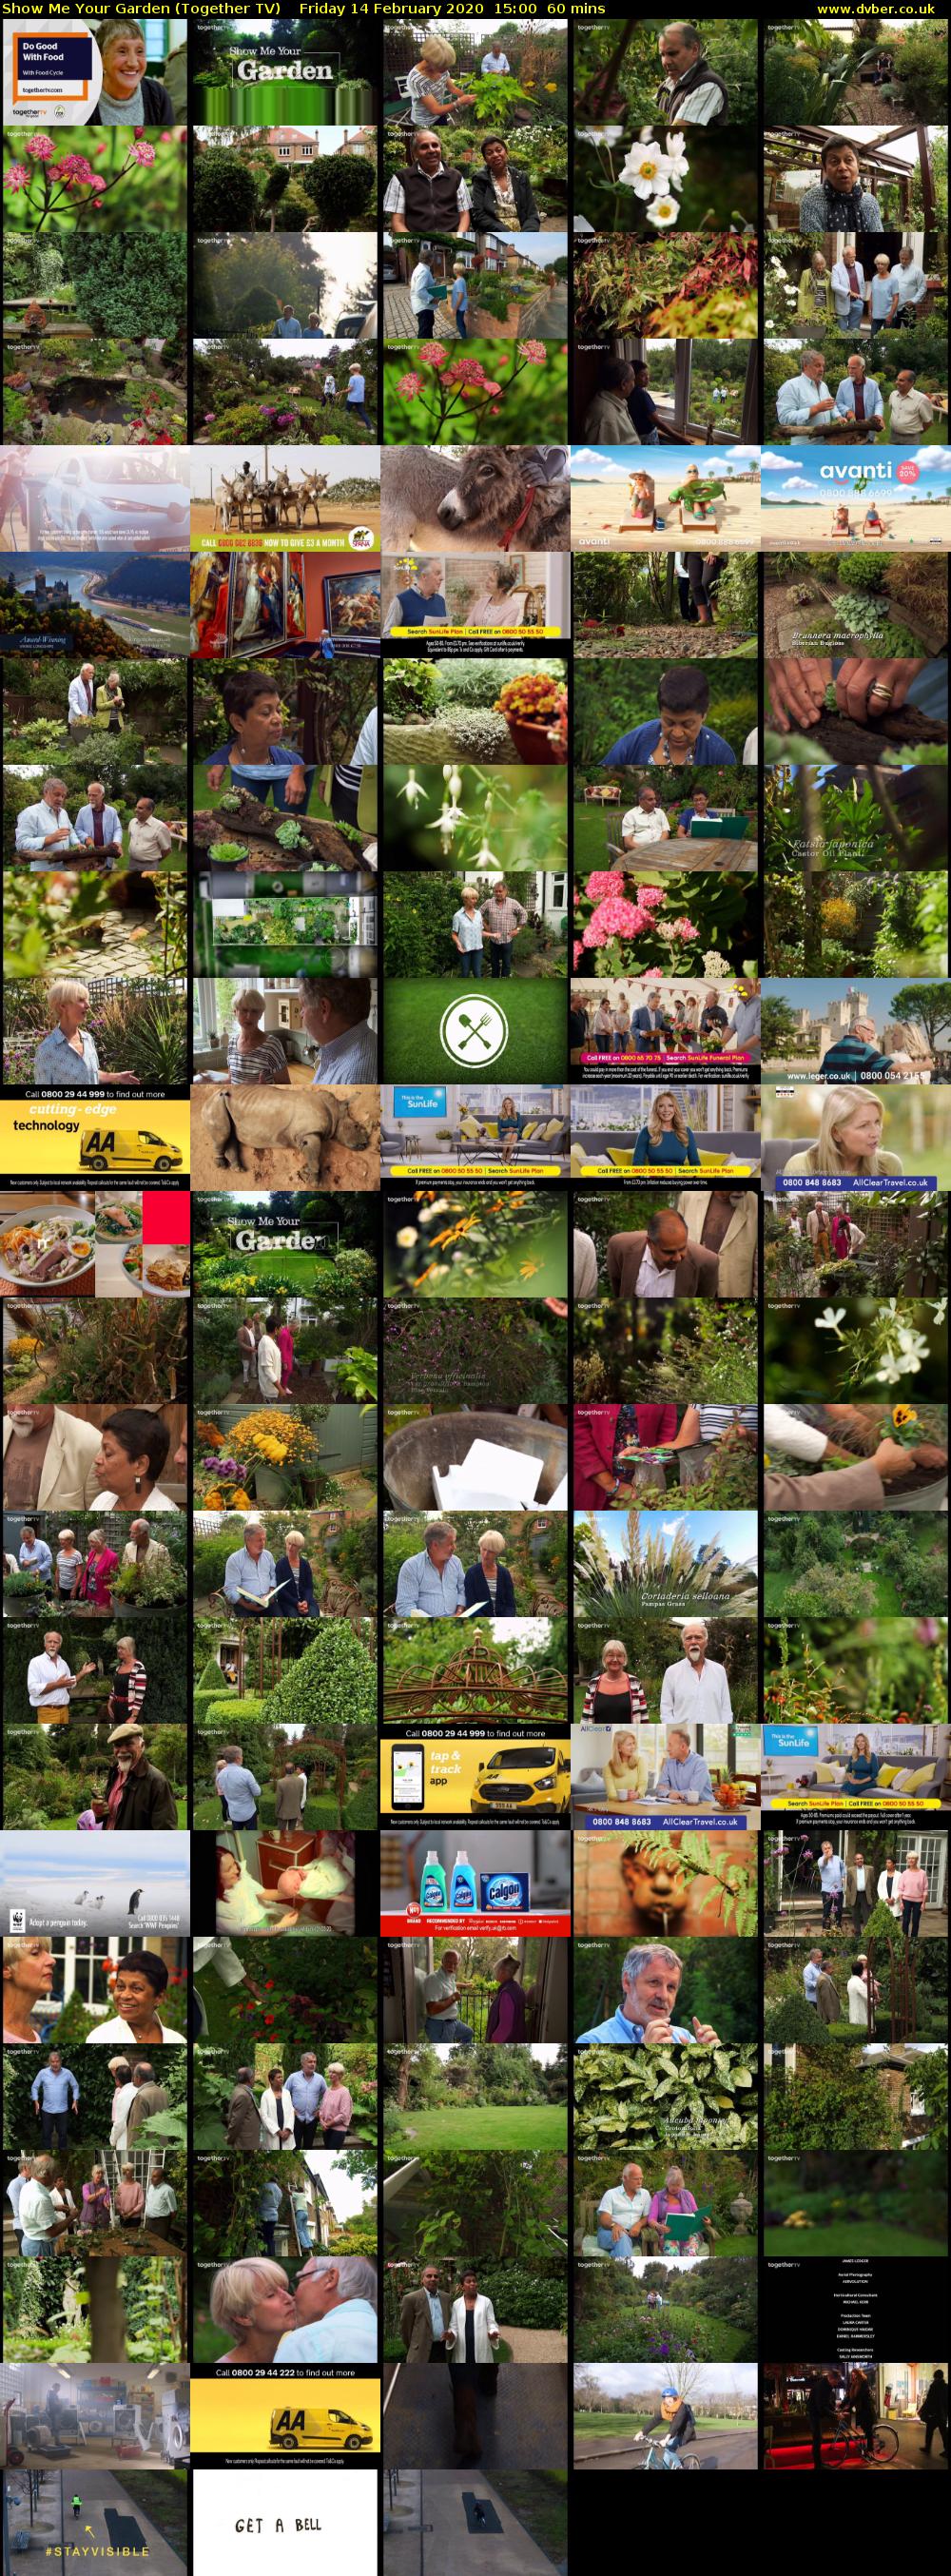 Show Me Your Garden (Together TV) Friday 14 February 2020 15:00 - 16:00